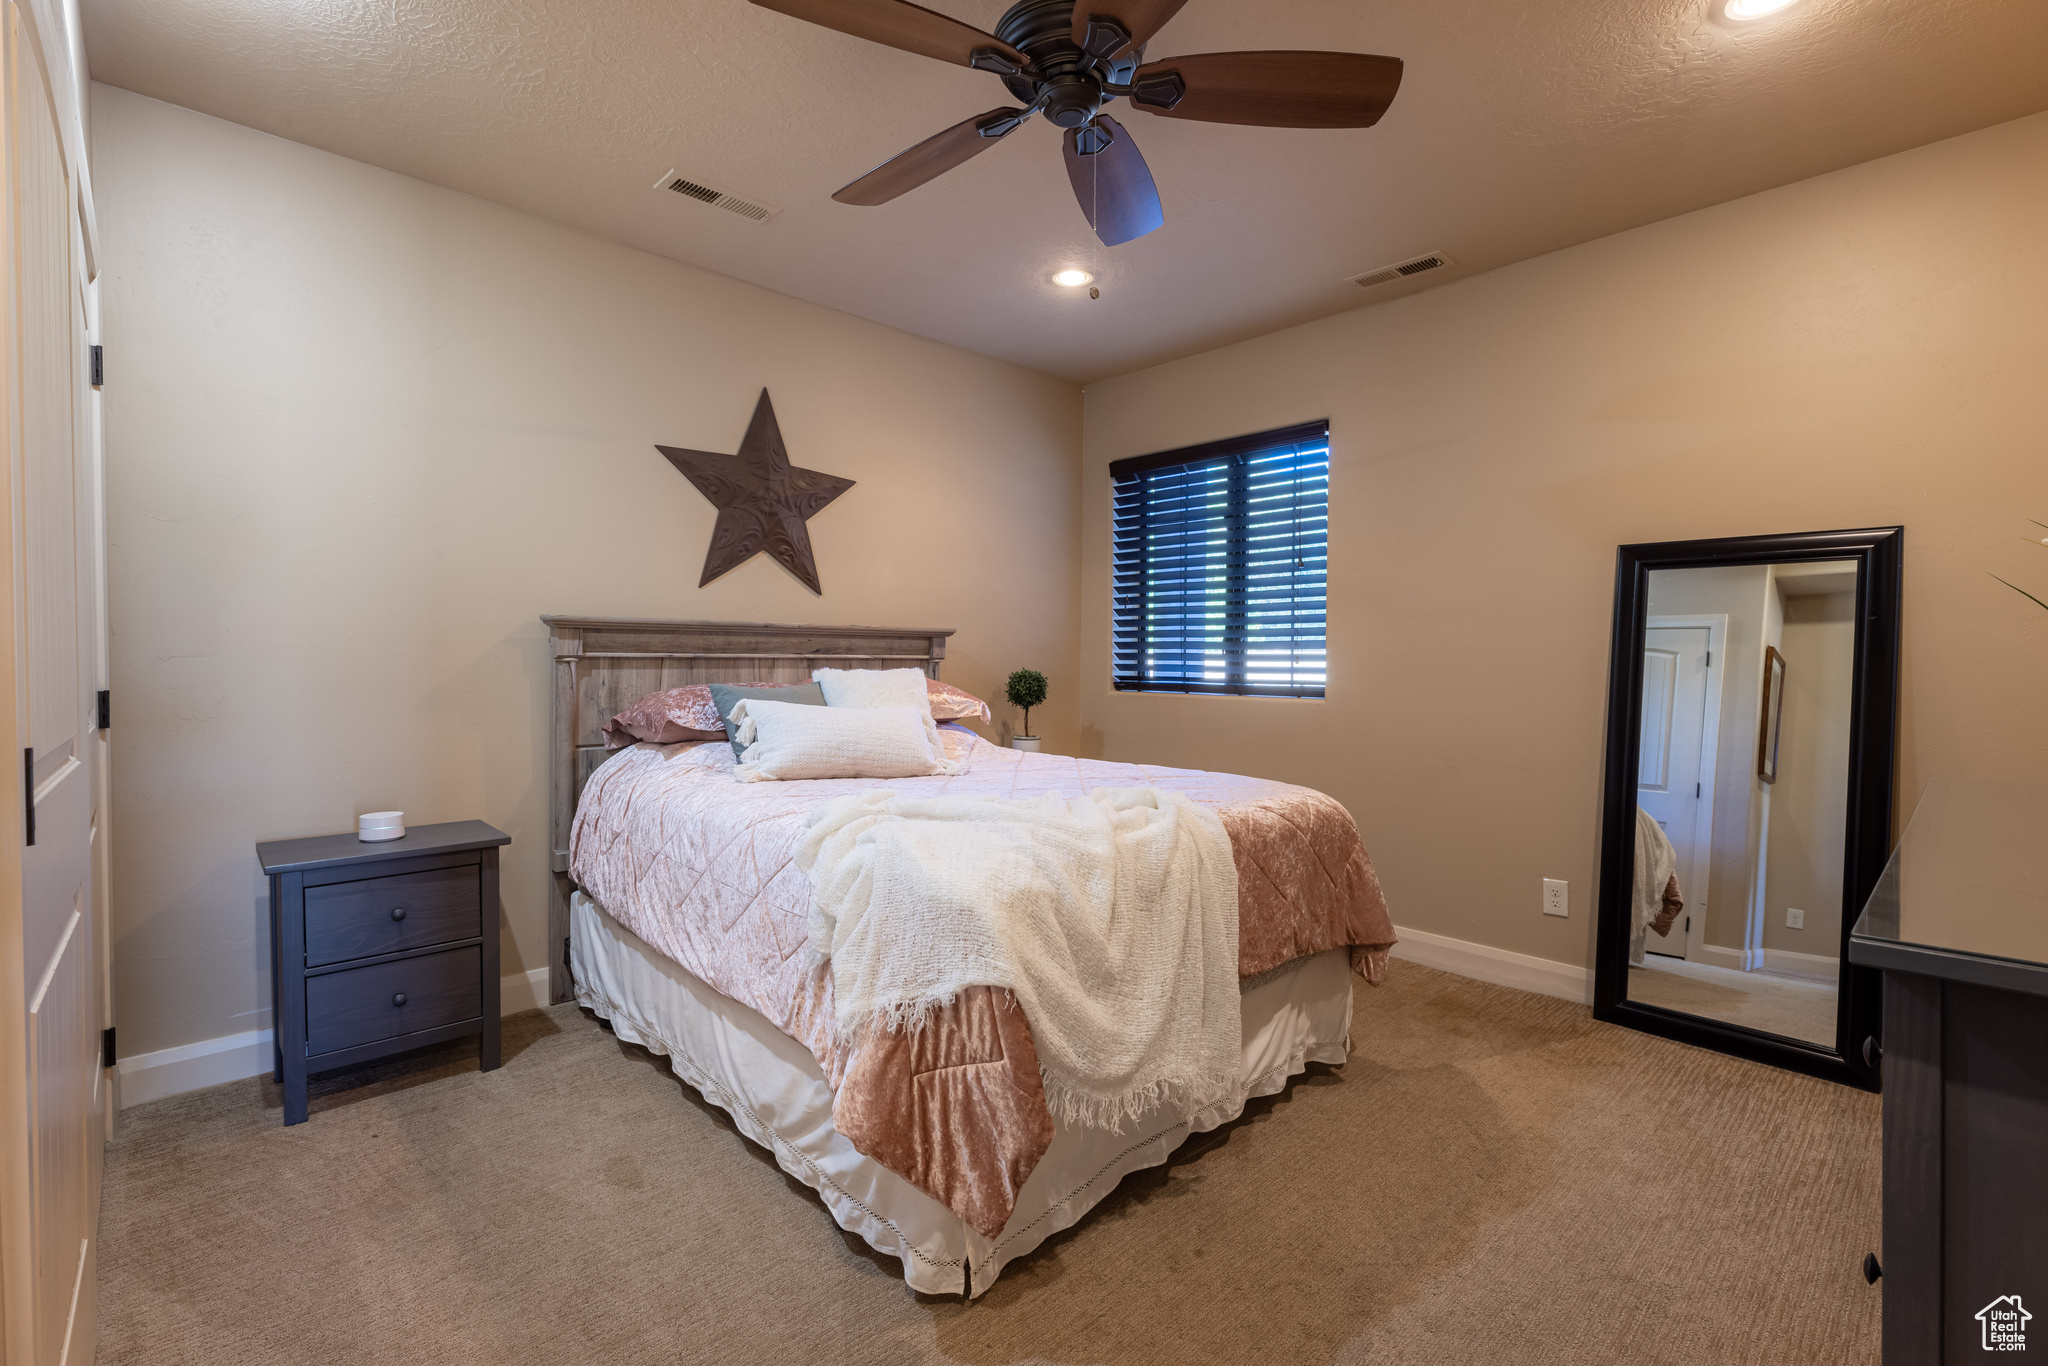 3rd Bedroom with ceiling fan and light carpet w/bathroom adjacent